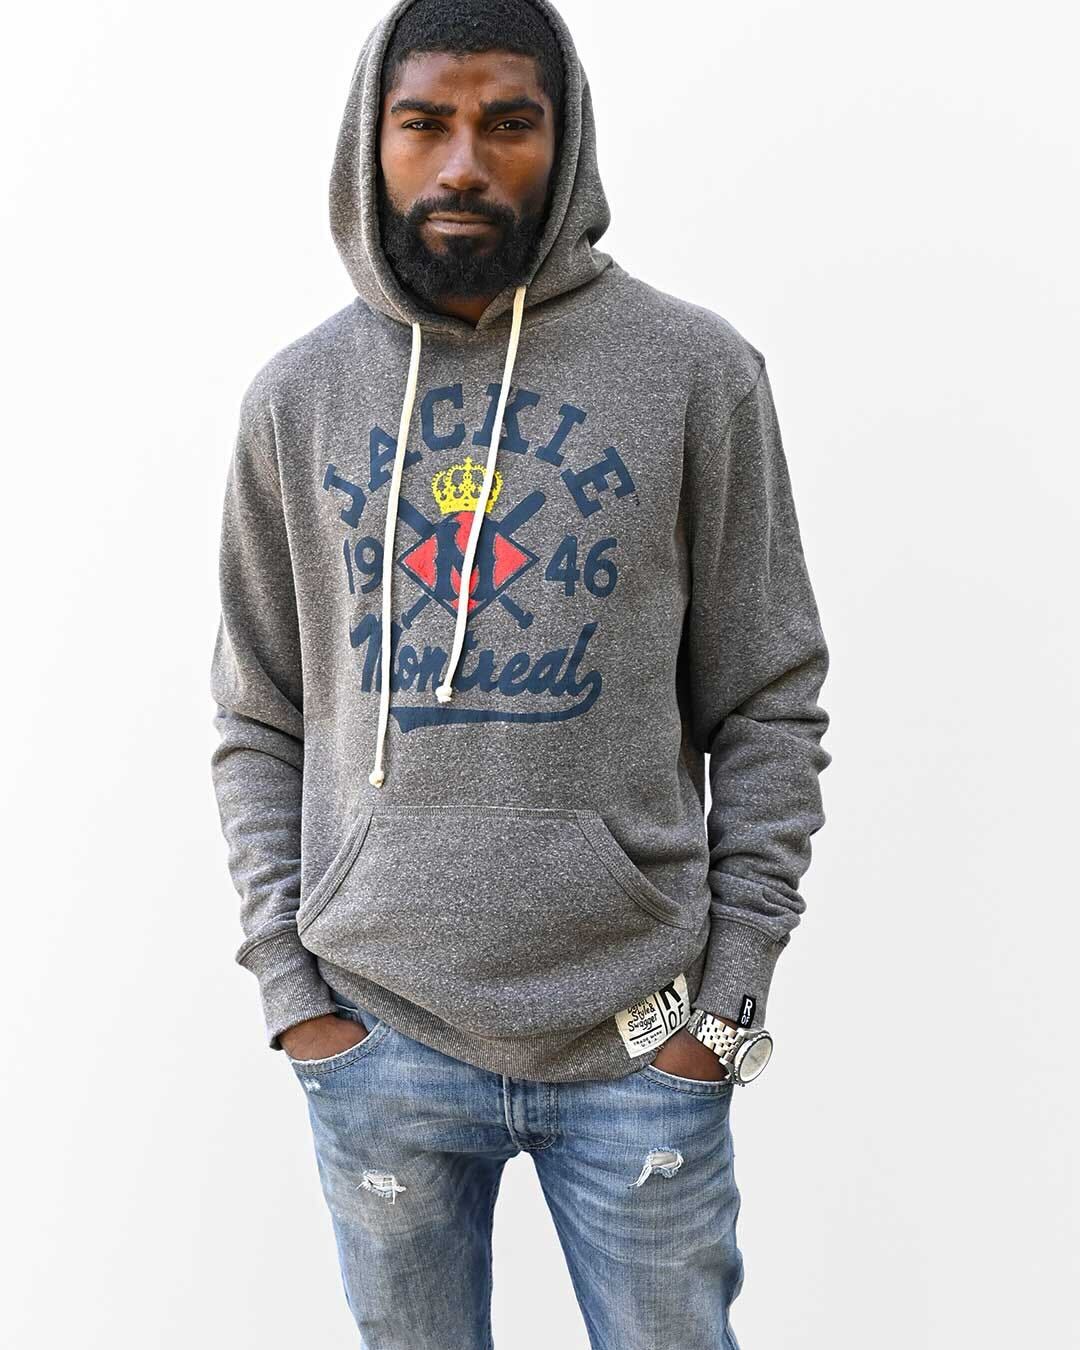 Jackie Robinson Montreal '46 Grey Hoody - Roots of Fight Canada